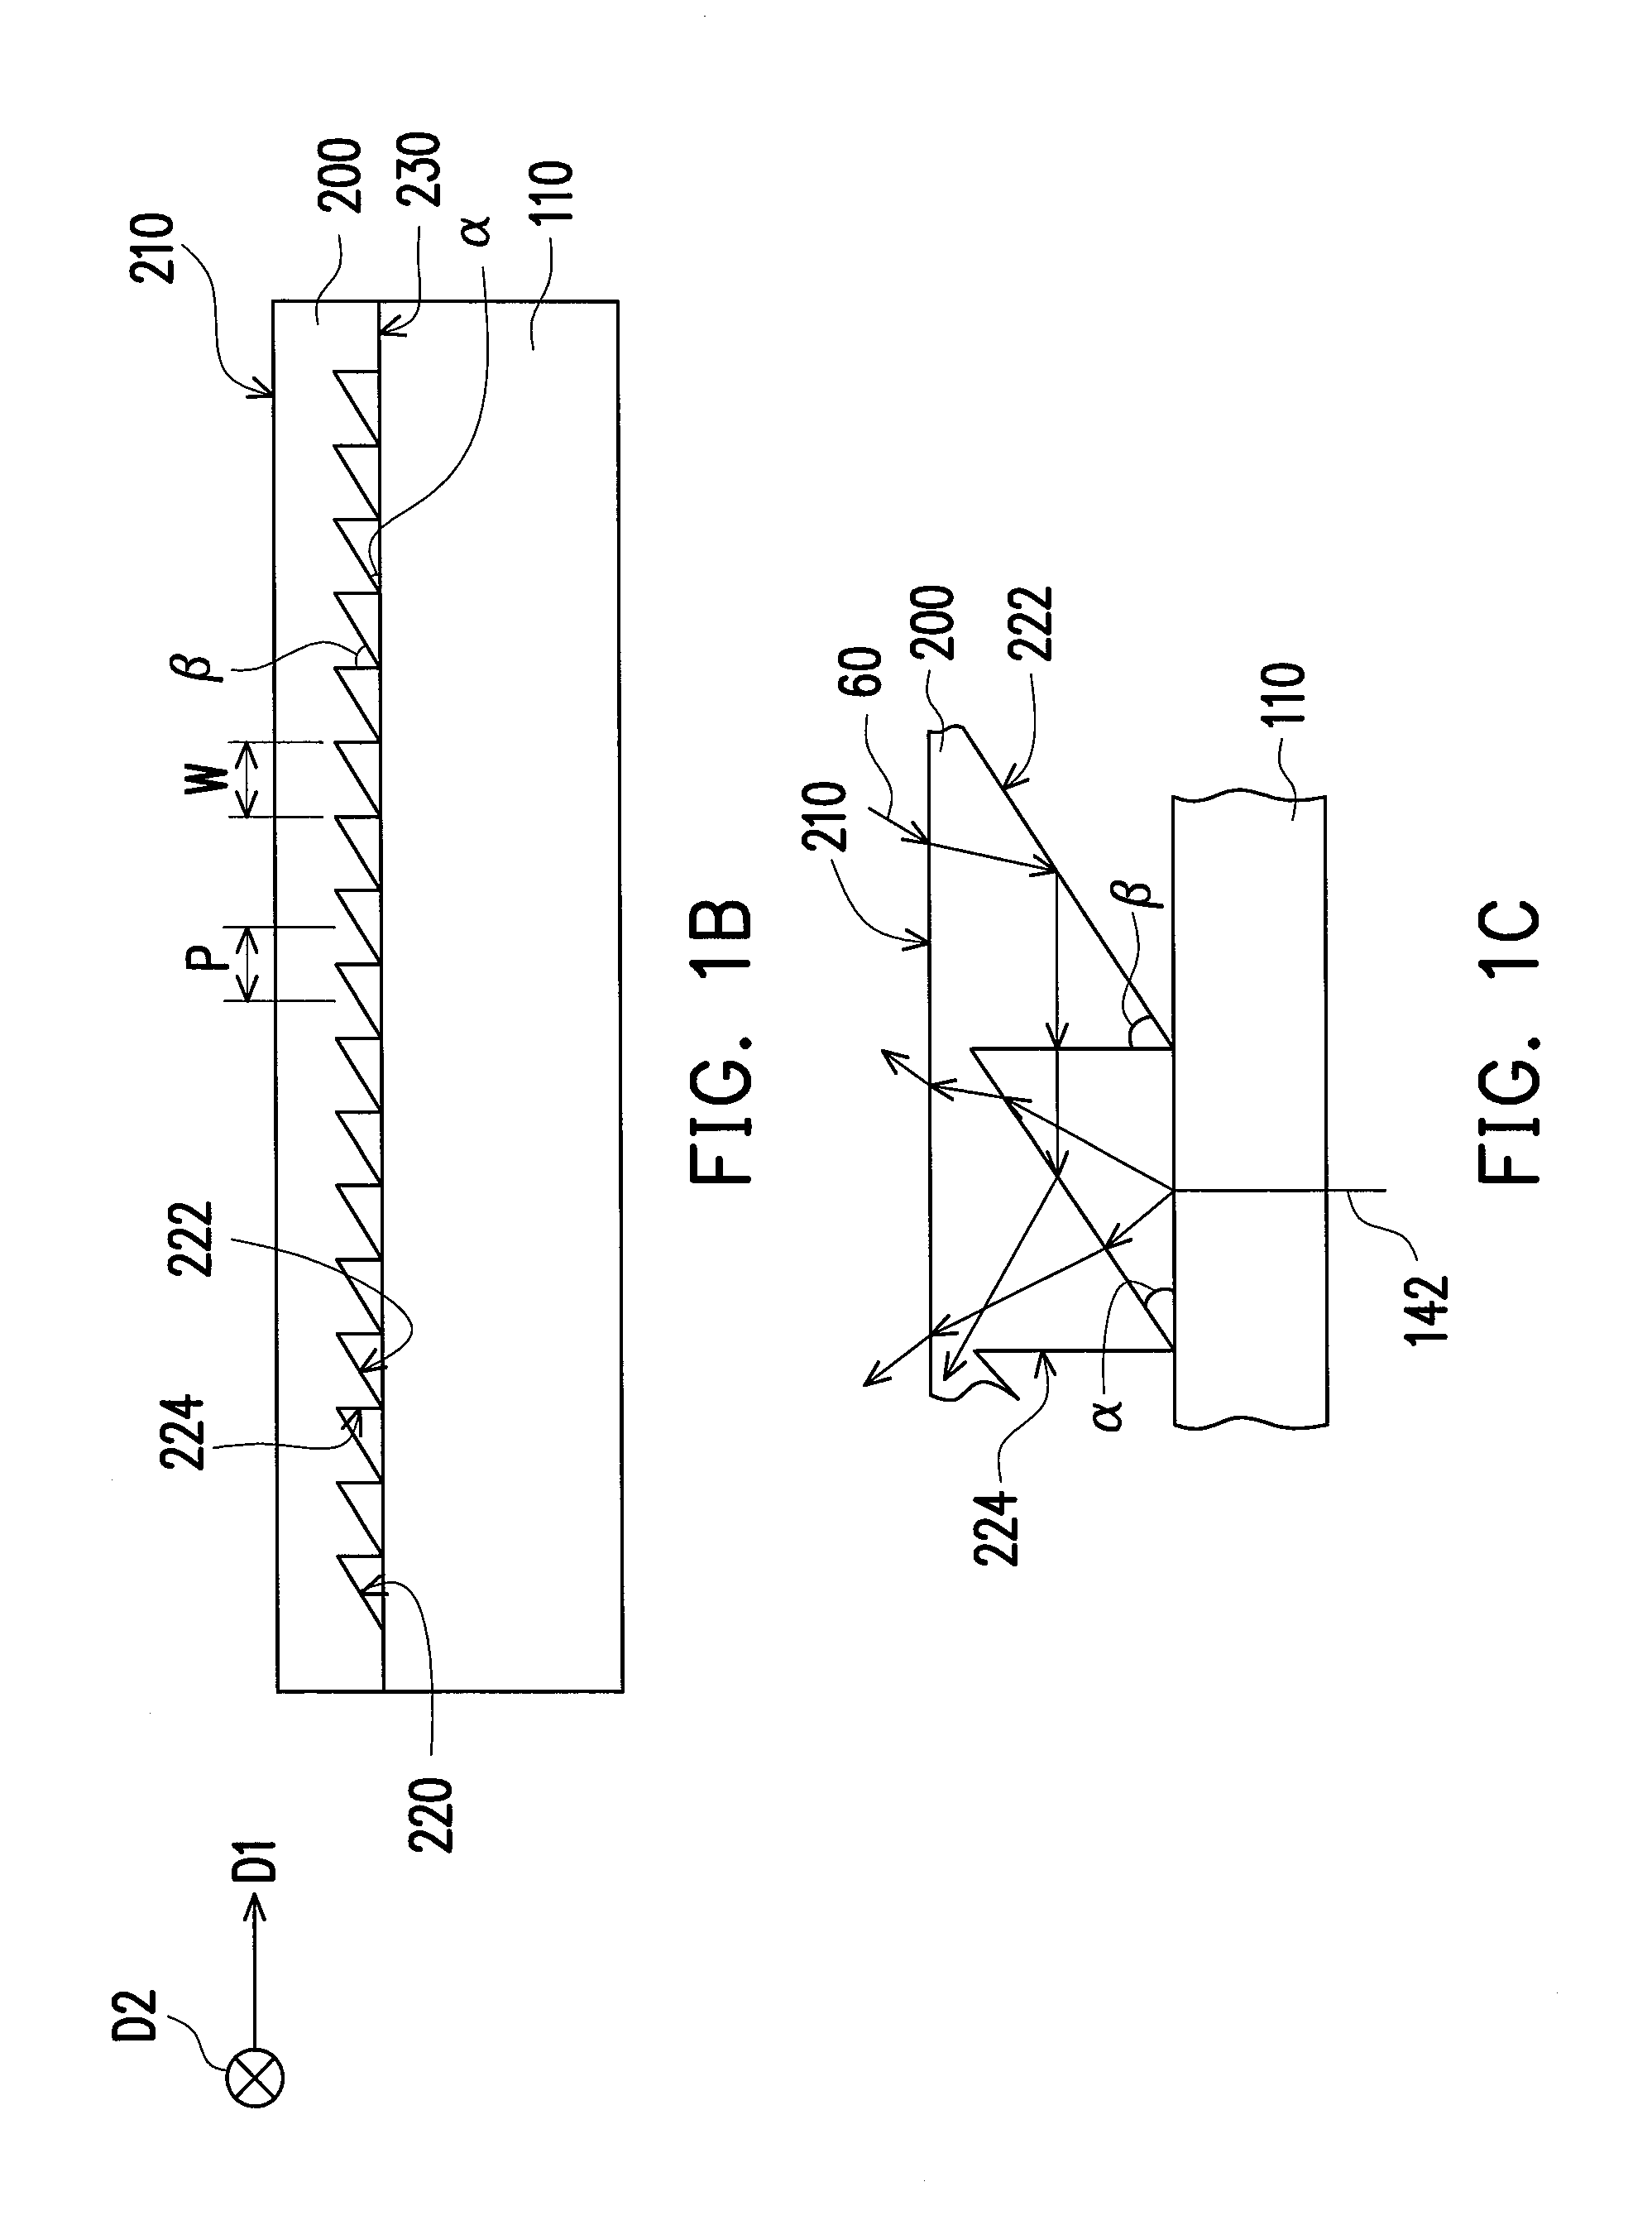 Vehicular optical touch apparatus